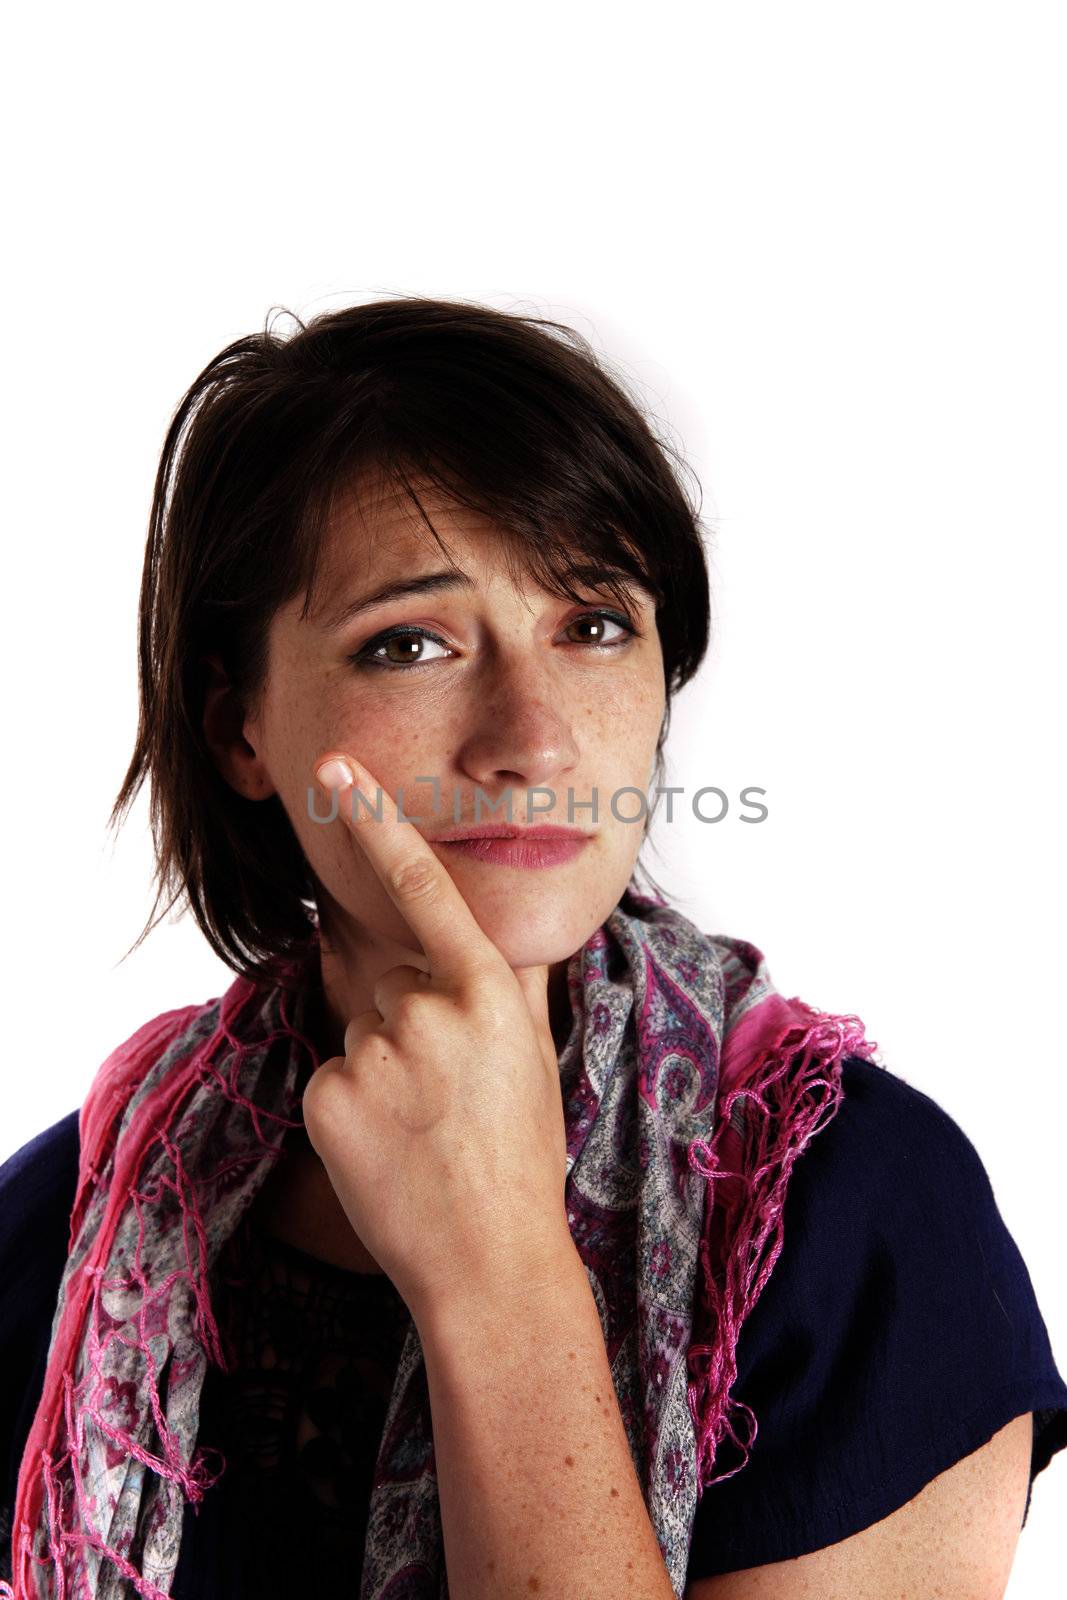 humorous portrait of a young brunette woman with finger of her mouth, colored scarf